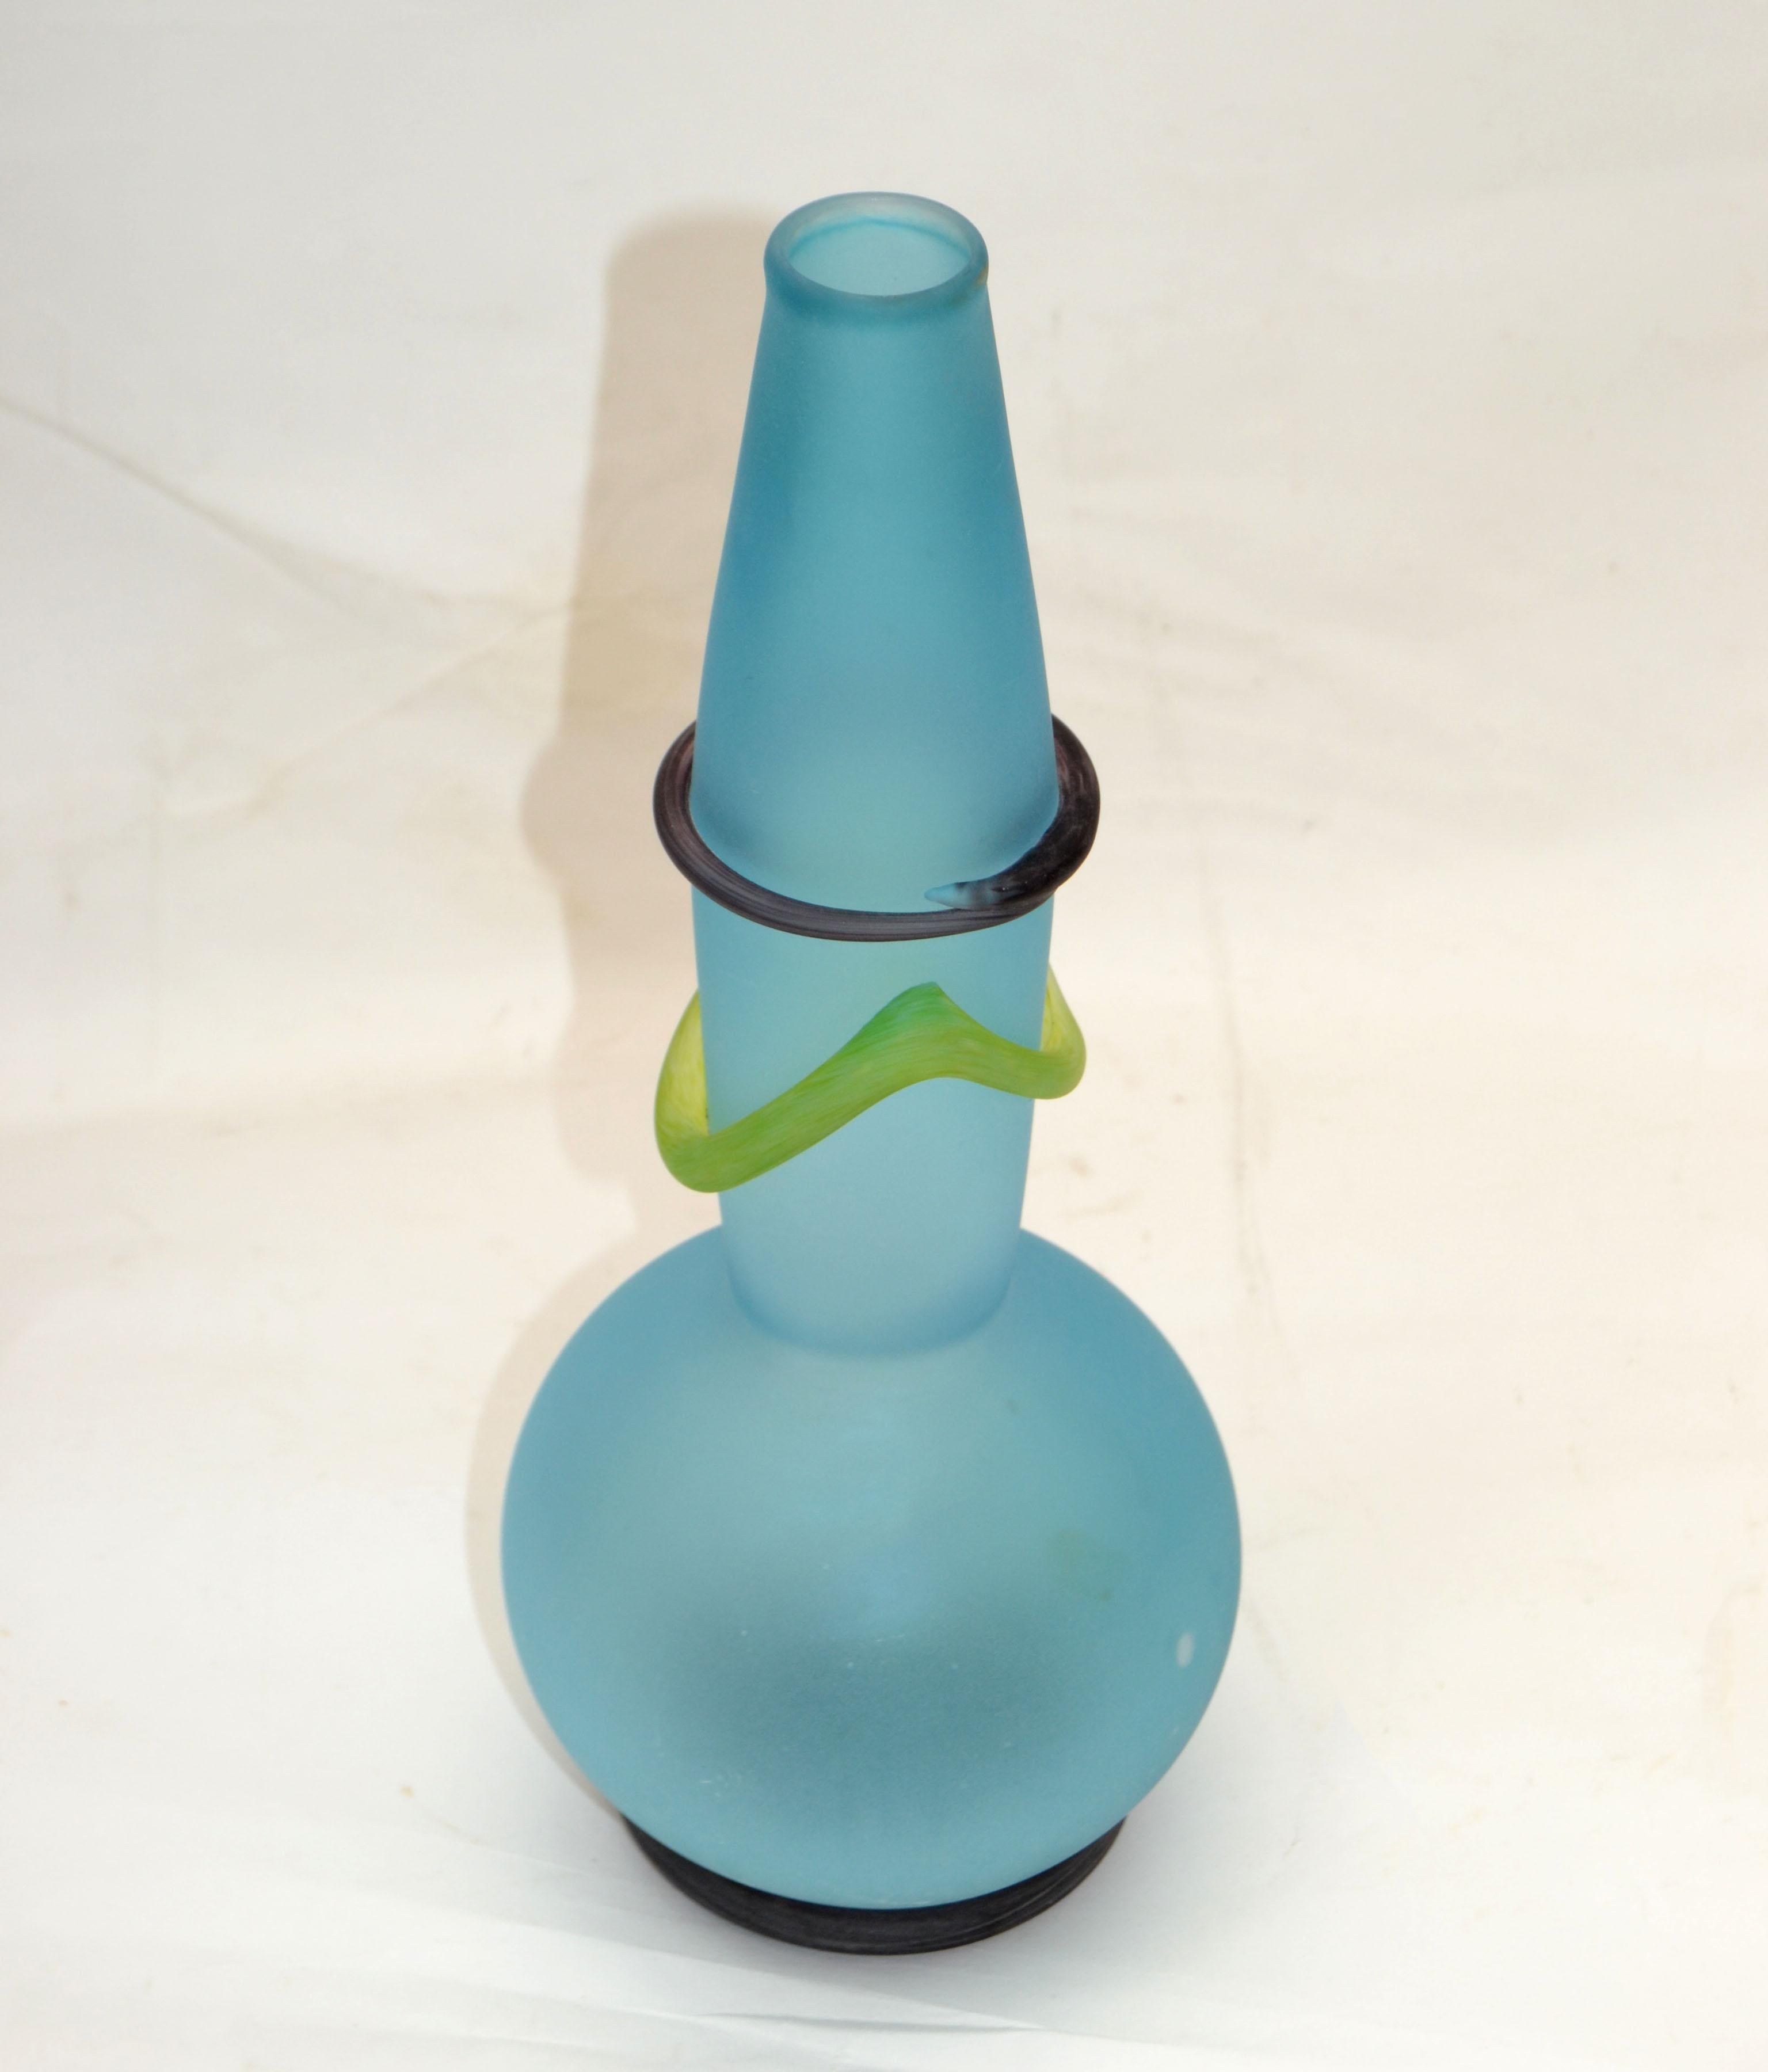 Studio Paran blown art glass vase in turquoise blue and yellow glass from America.
The opening with 1.5 inches diameter is for a little bouquet.
Mid-Century Modern unique glass art very elegant and practical.